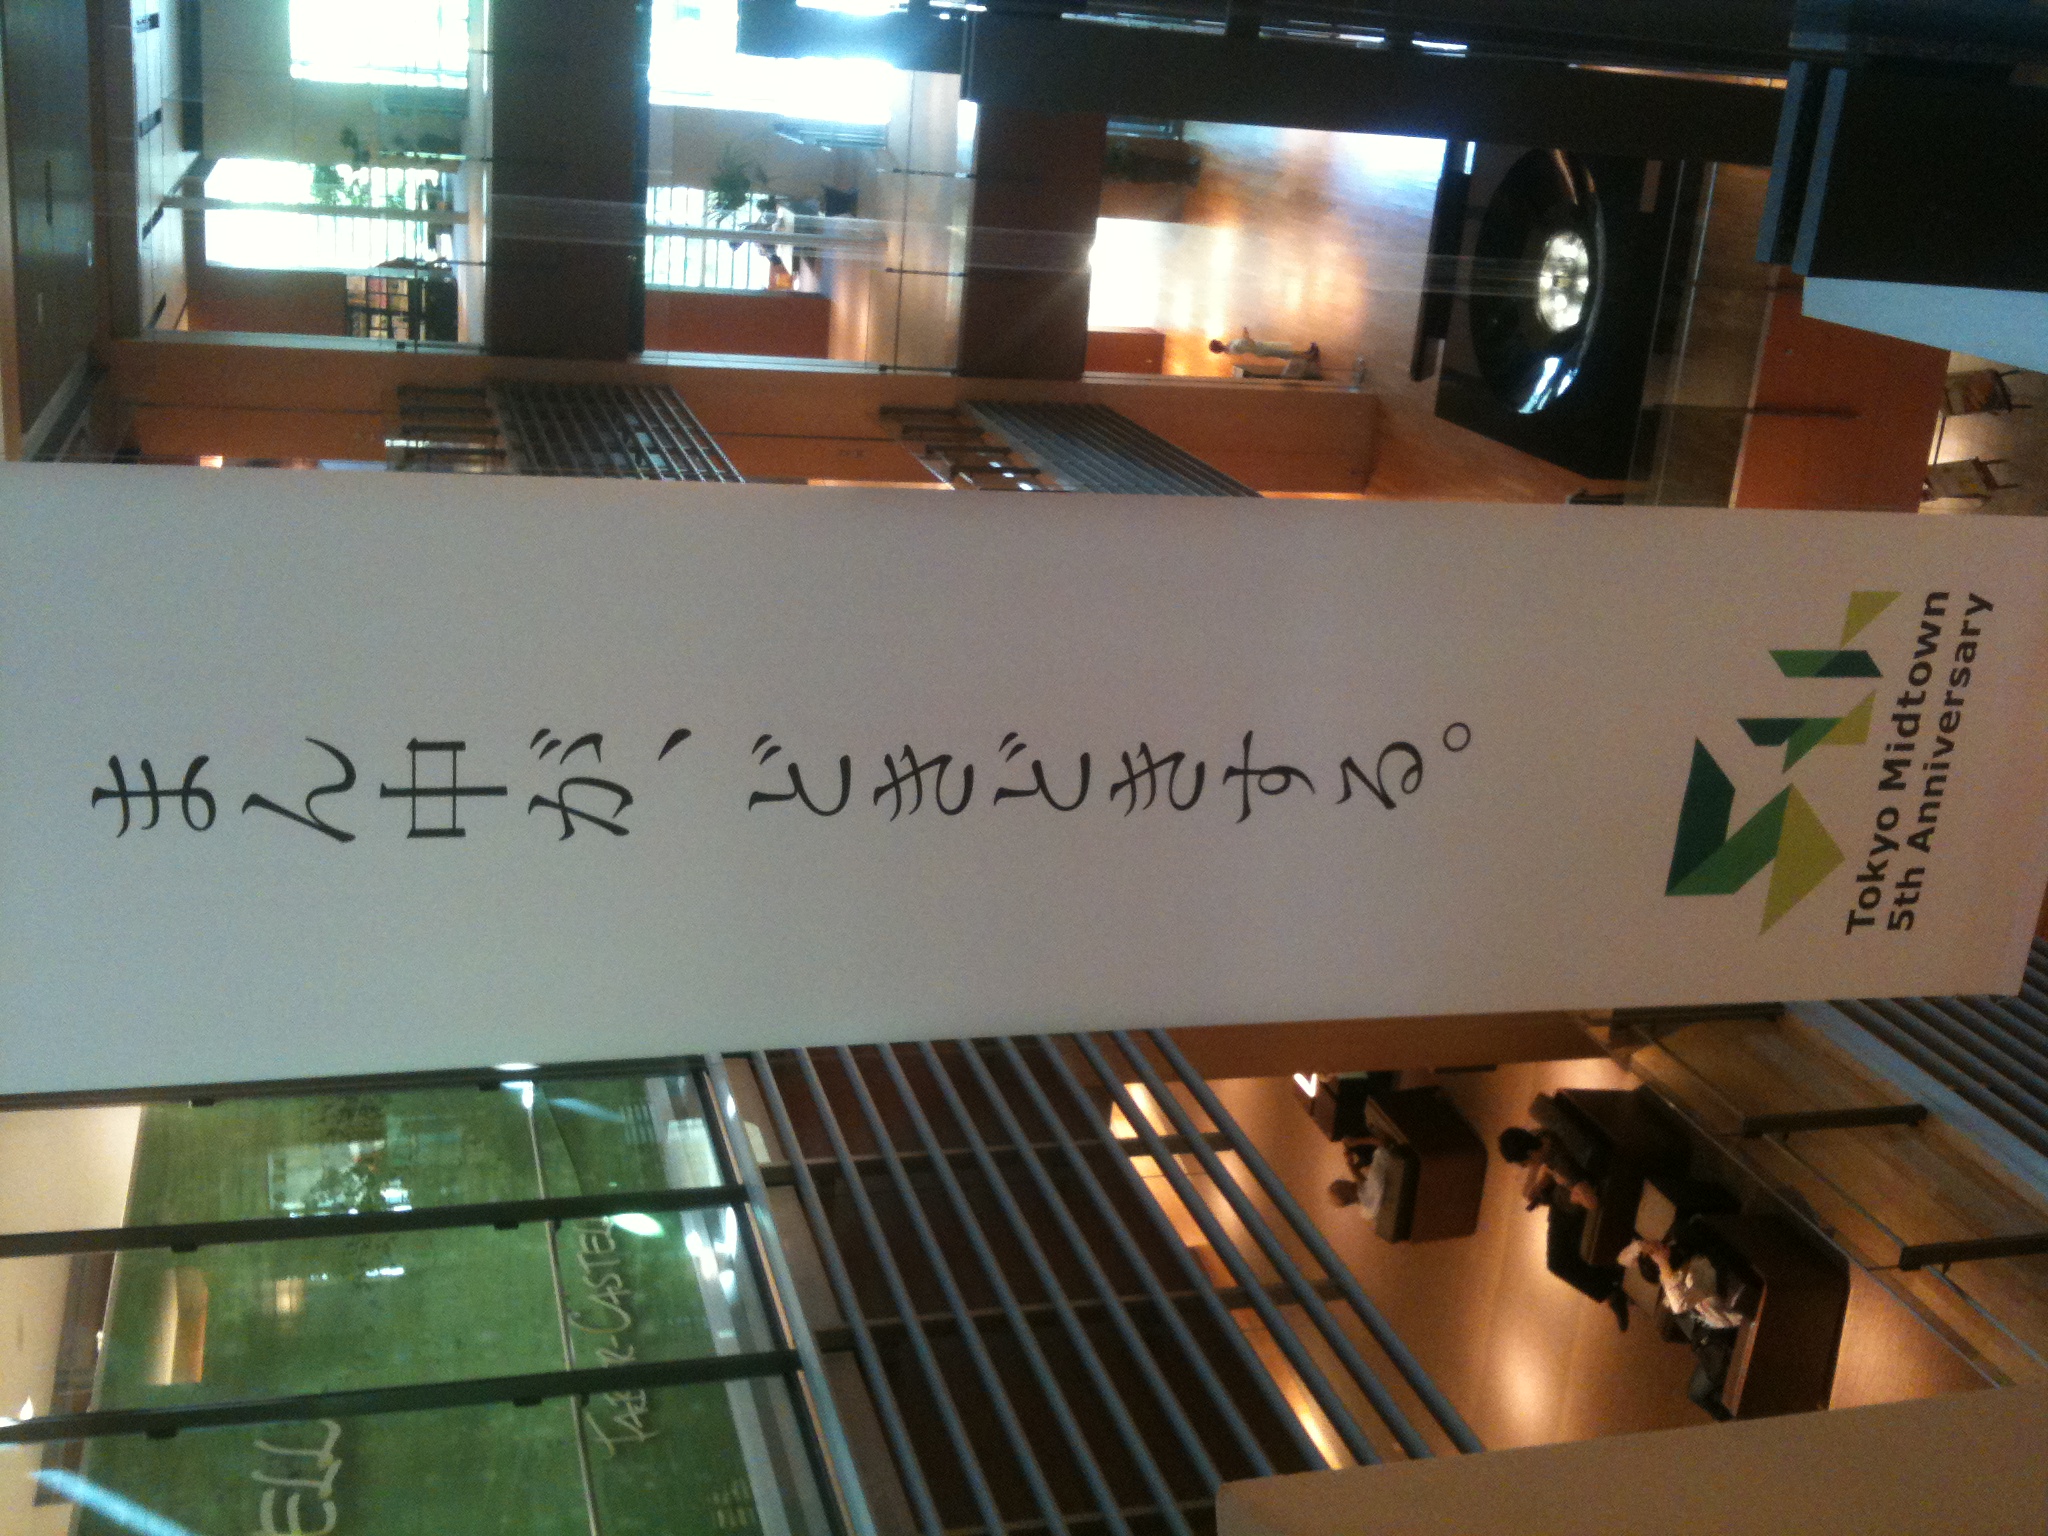 a sign in an atrium with japanese writing